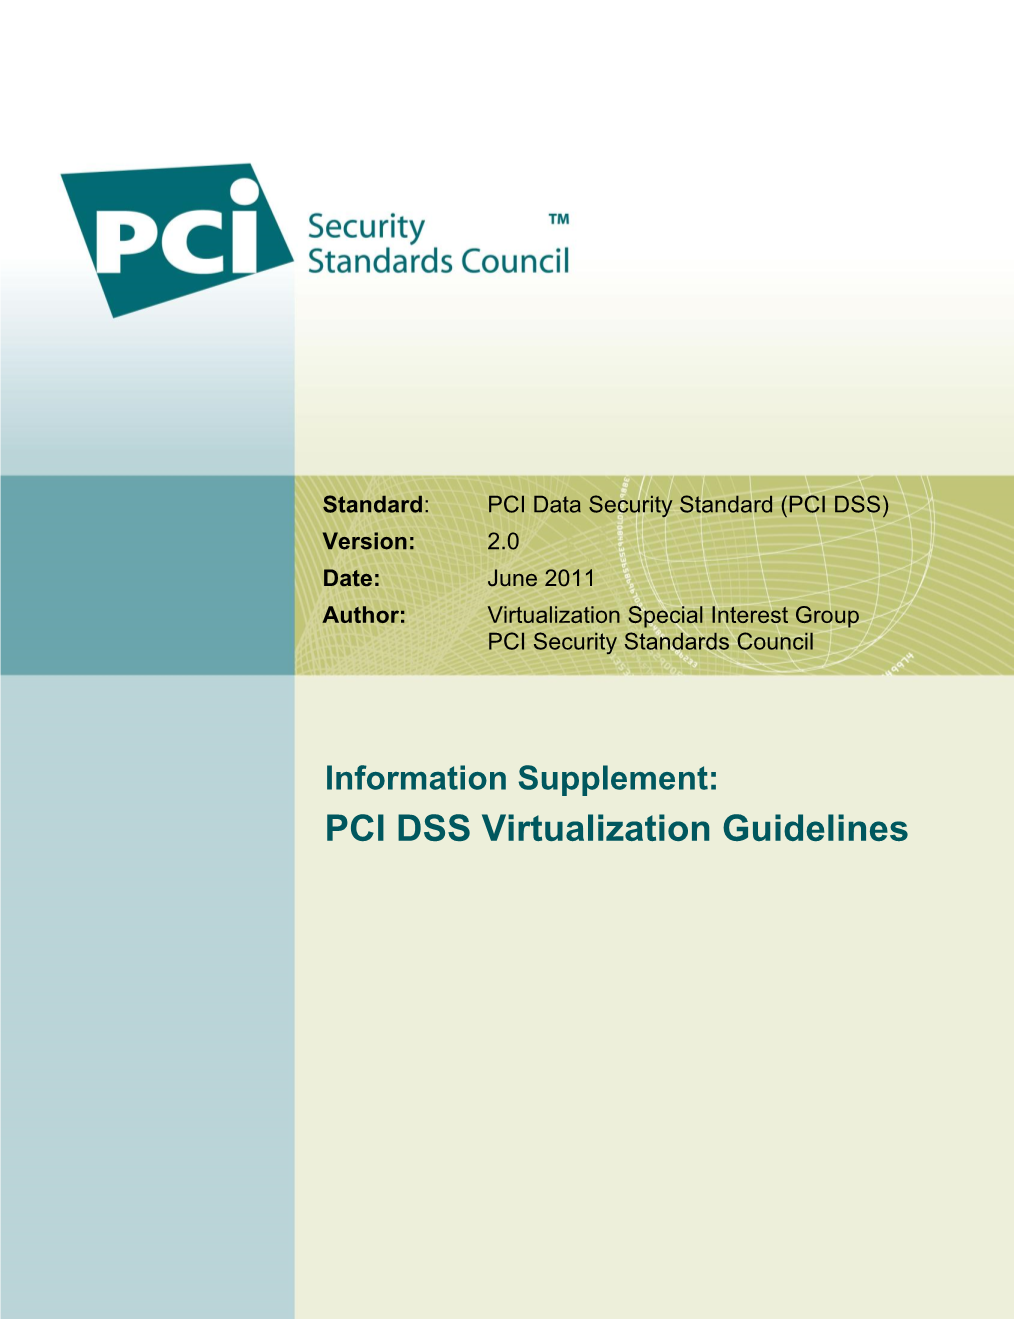 PCI DSS Virtualization Guidelines